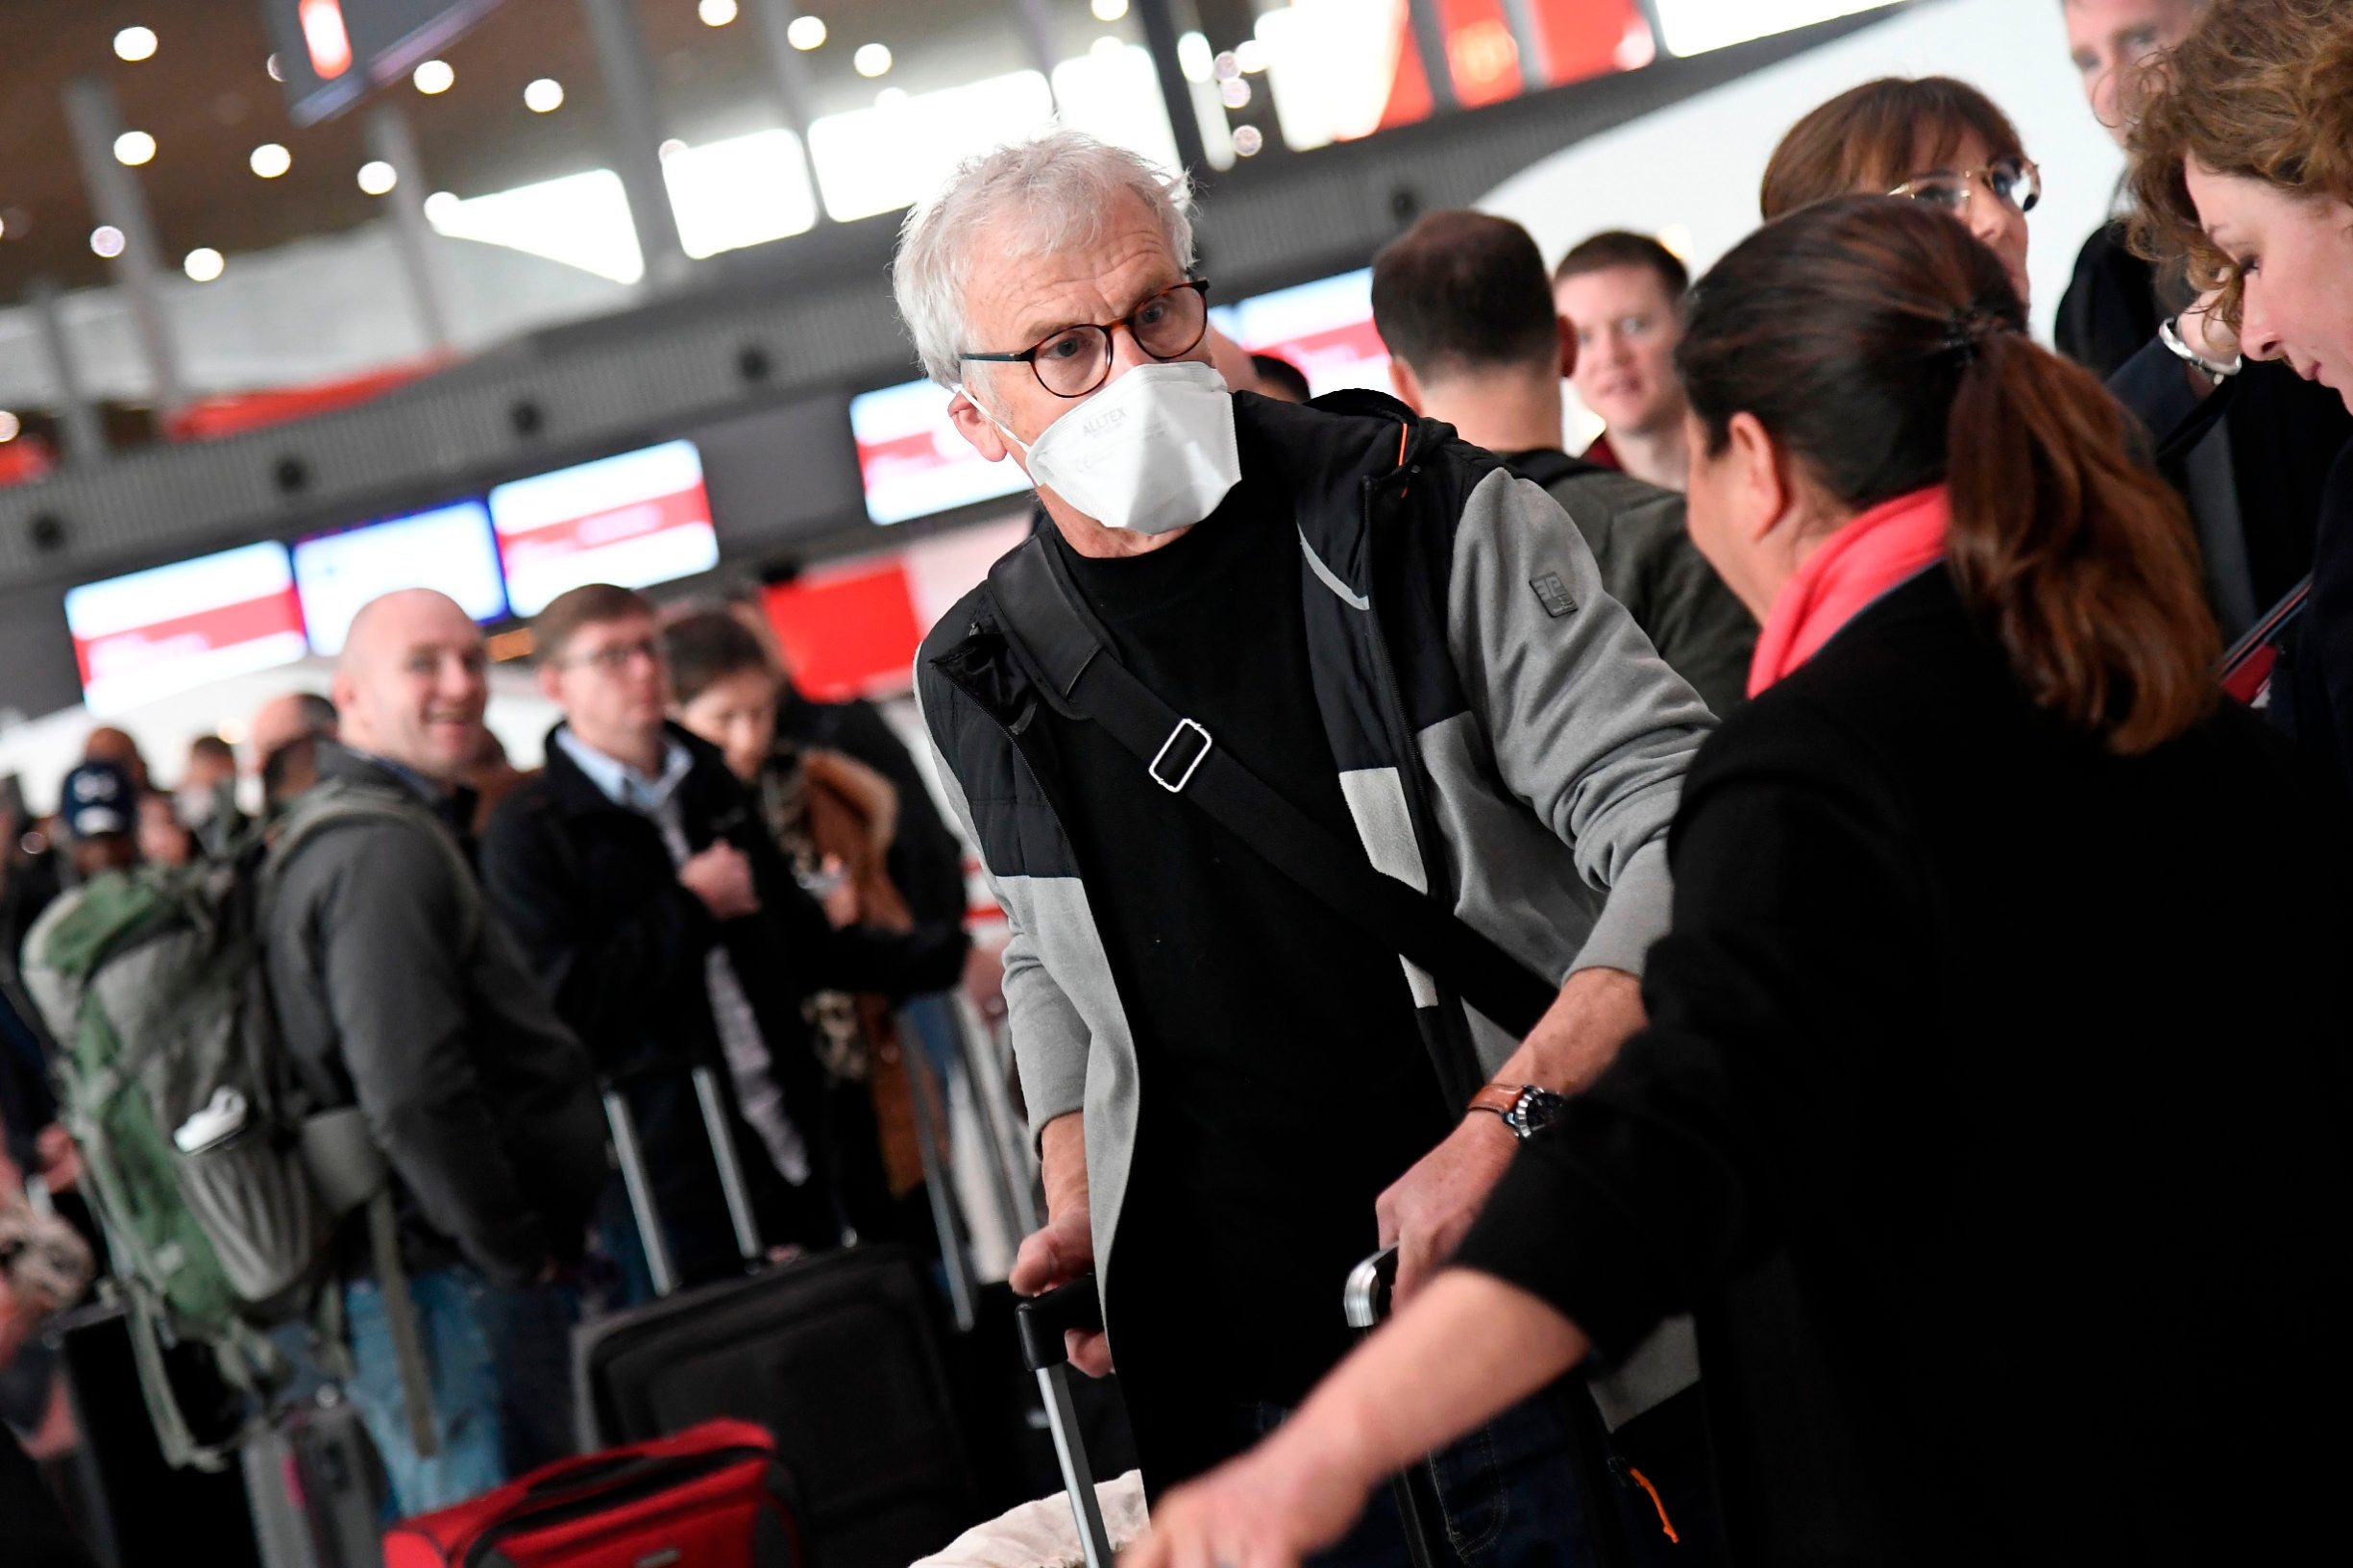 Travellers with protective face masks wait in a check-in line at Paris-Charles-de-Gaulle airport after a US 30-day ban on travel from Europe due to the COVID-19 spread in Roissy-en-France on March 12, 2020. - US President Donald Trump announced on March 11, 2020 a shock 30-day ban on travel from mainland Europe over the coronavirus pandemic that has sparked unprecedented lockdowns, widespread panic and another financial market meltdown. (Photo by Bertrand GUAY / AFP)